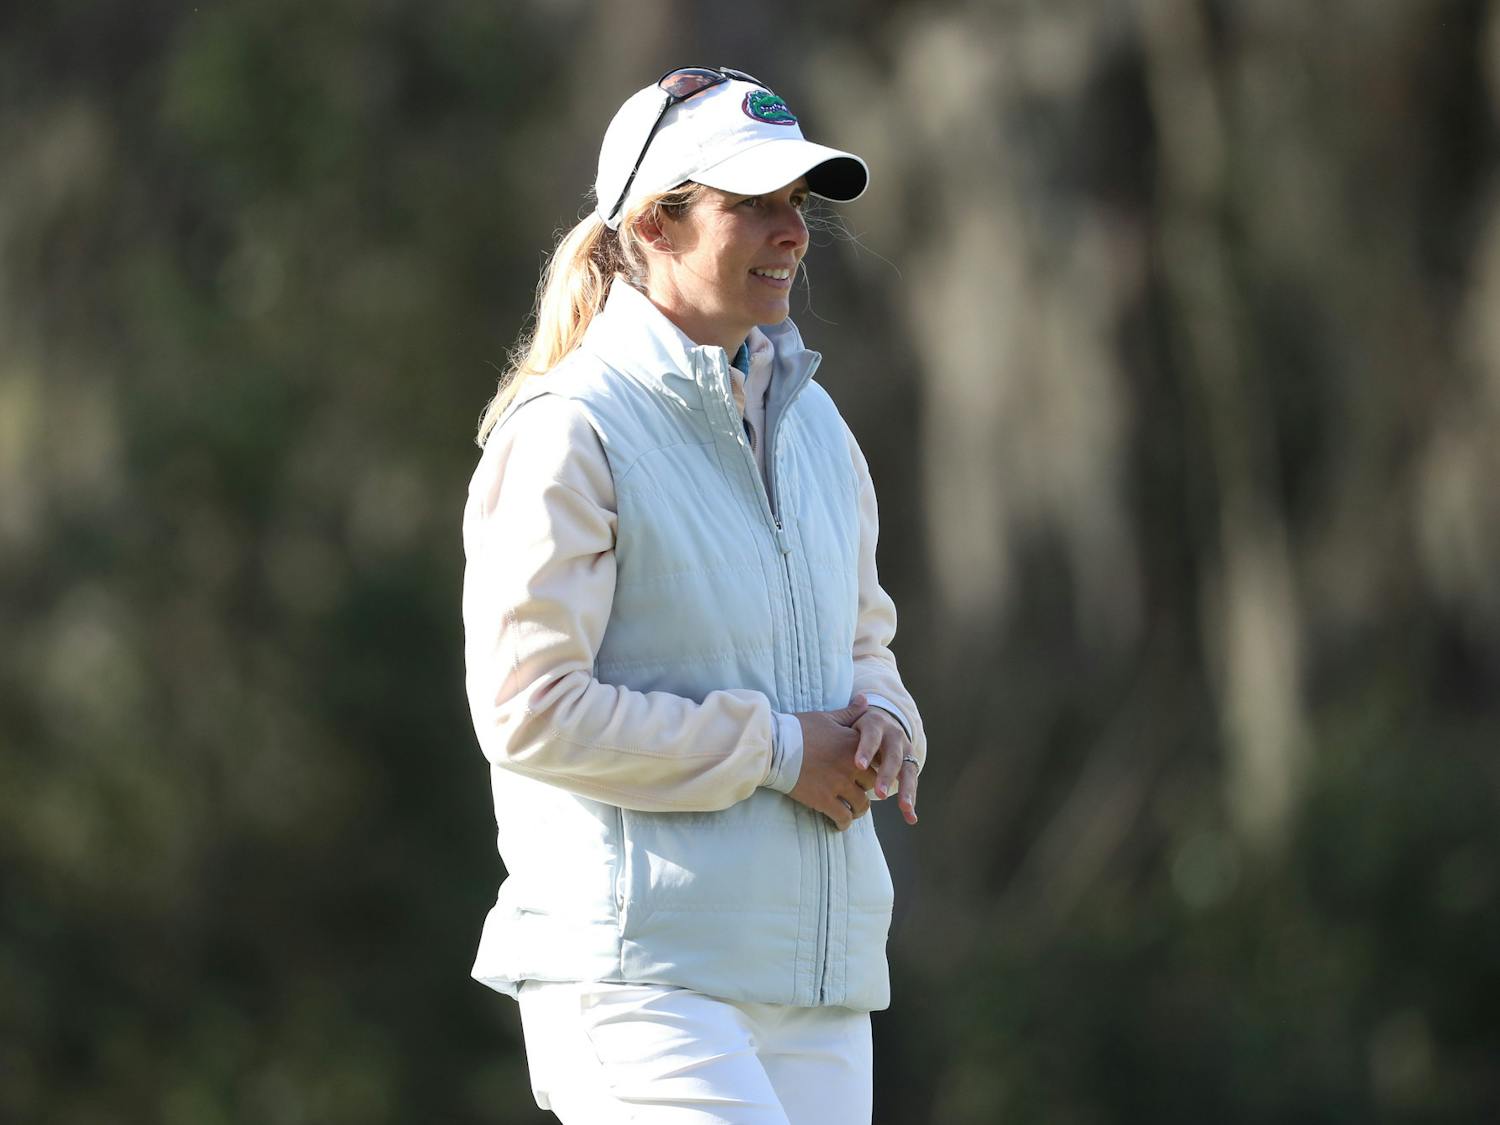 The Gators shot a collective 43-over-par and finished in ninth place, 26 strokes behind the champion South Carolina Gamecocks. Courtesy of the UAA. Photo from Feb. 22.